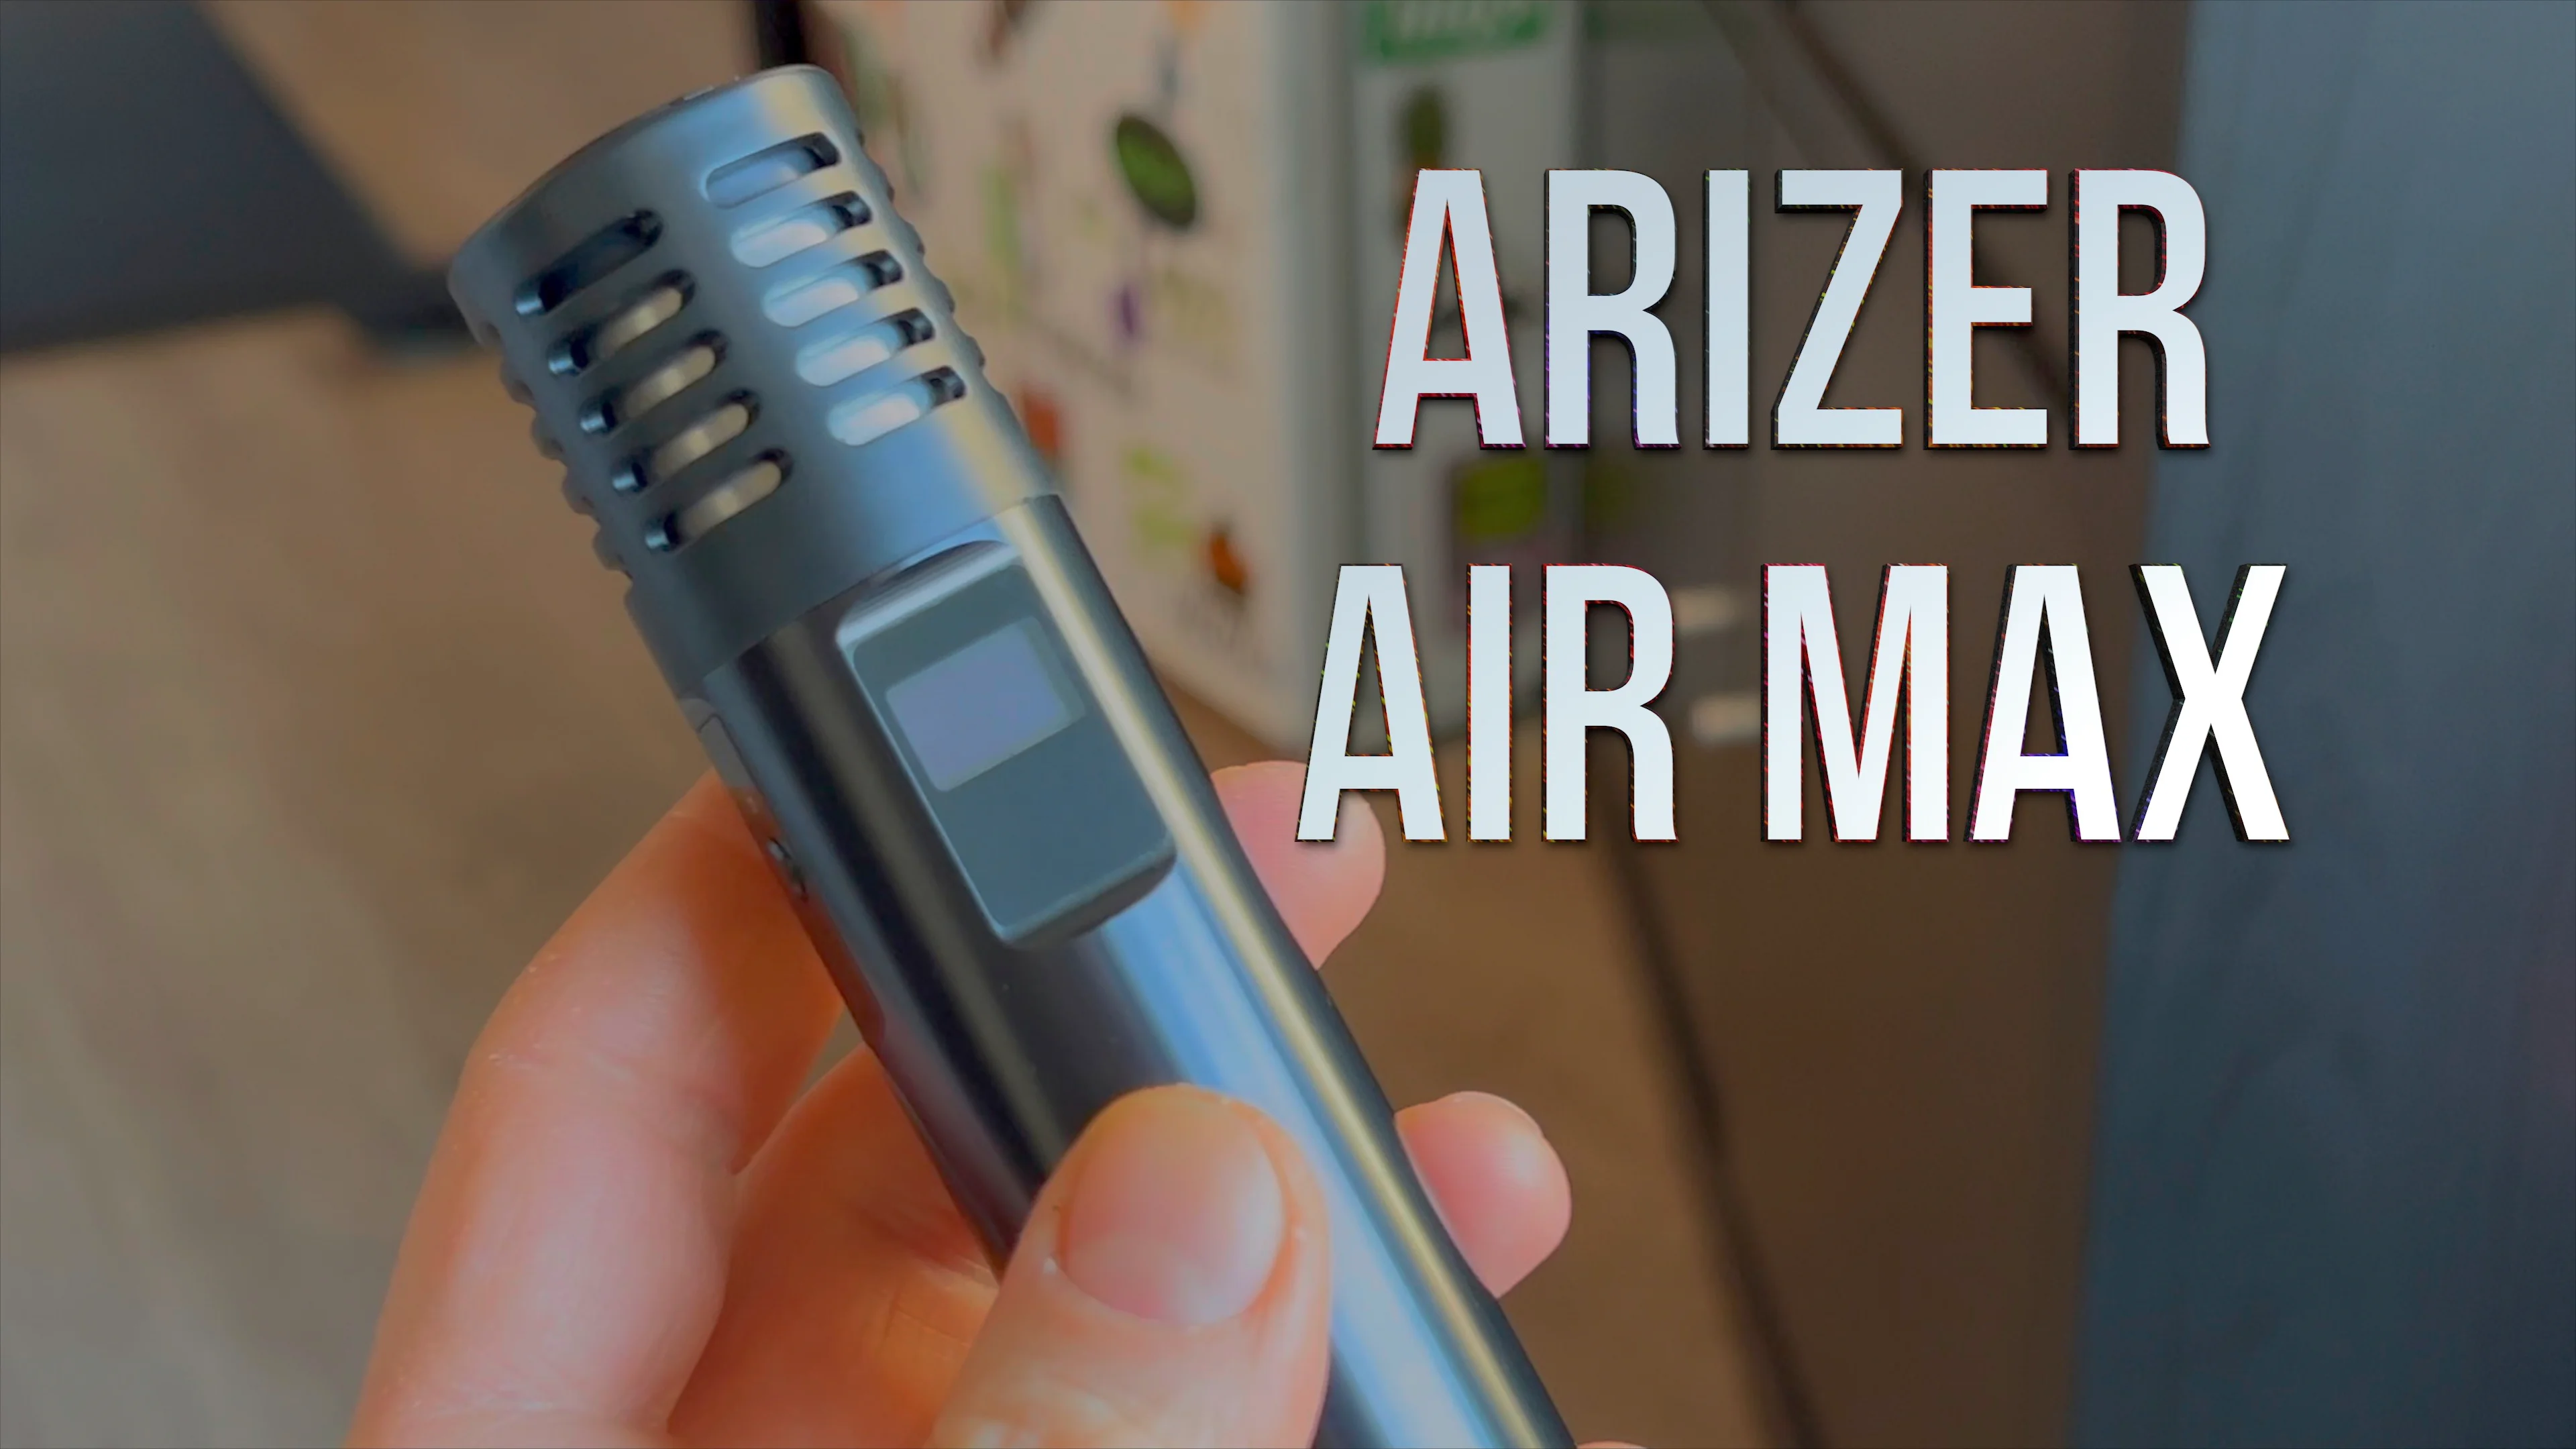 Arizer Air MAX Portable Vaporizer - Product Demo & Review